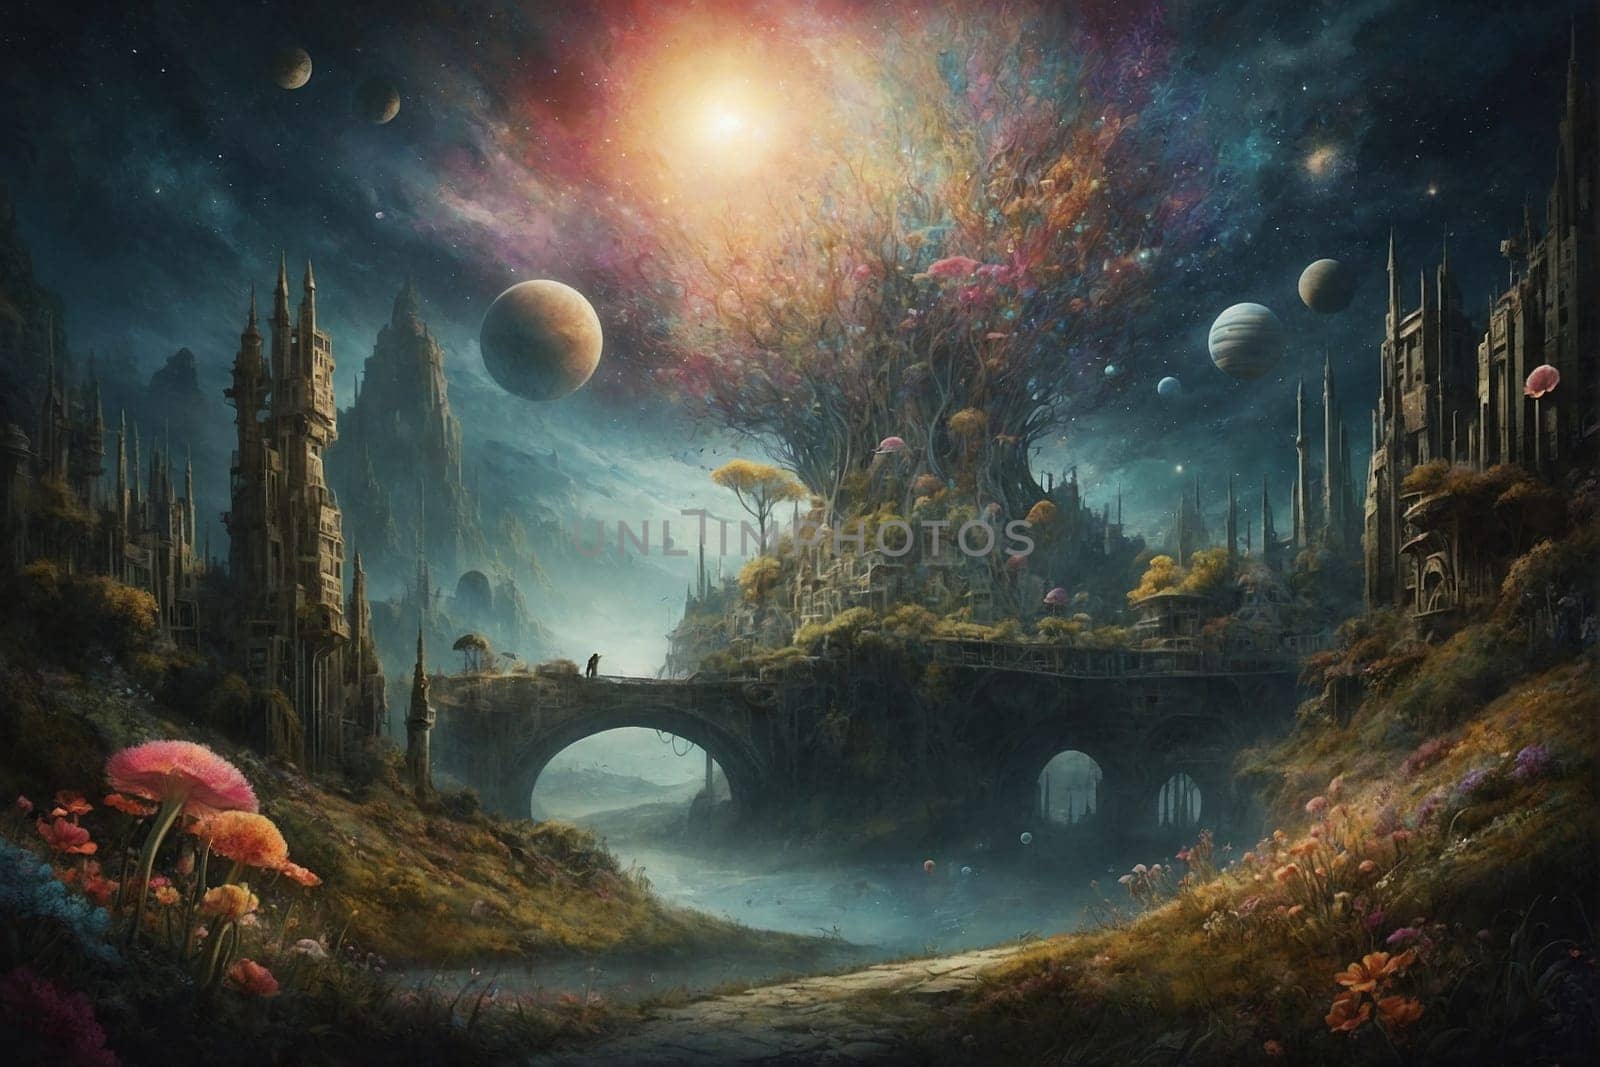 This photo depicts a painting of a bridge set within a fantasy landscape.